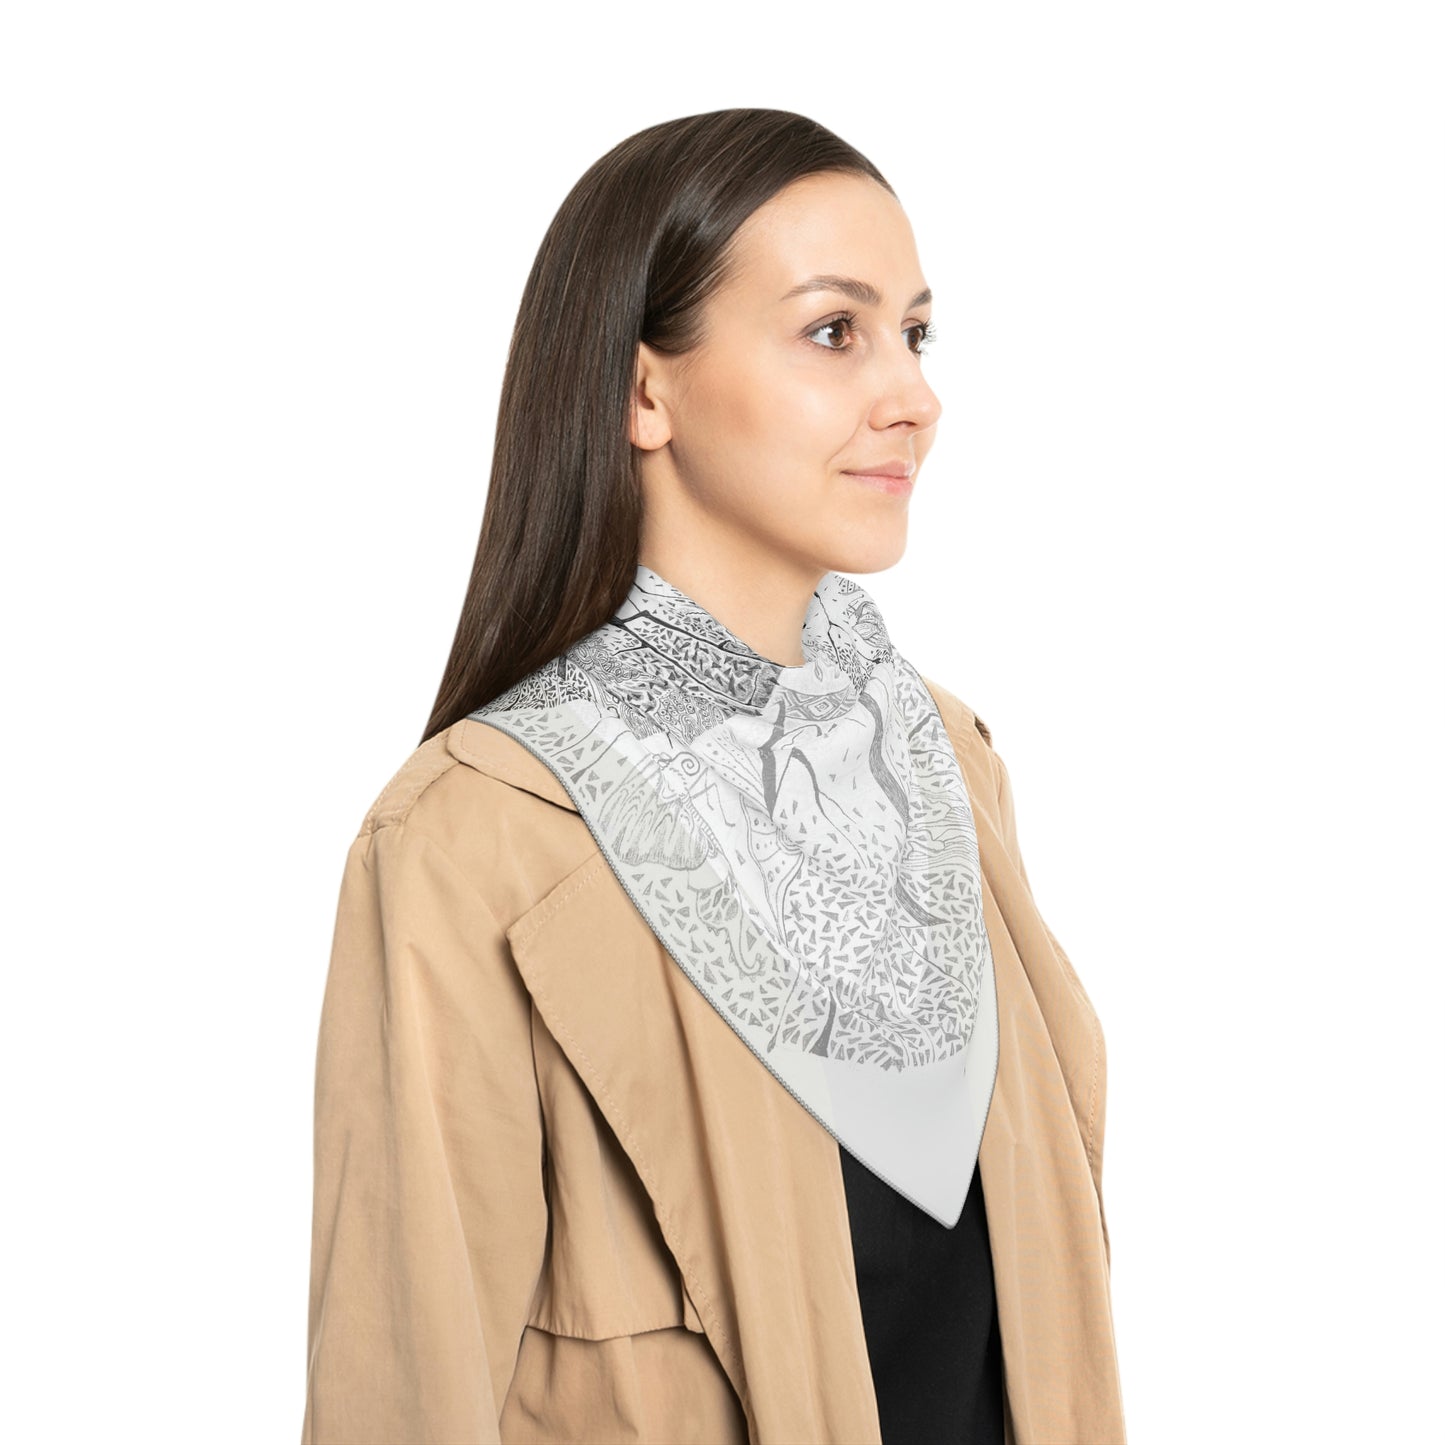 Chinese Years Zodiac Sign Poly Scarf (Snake) White